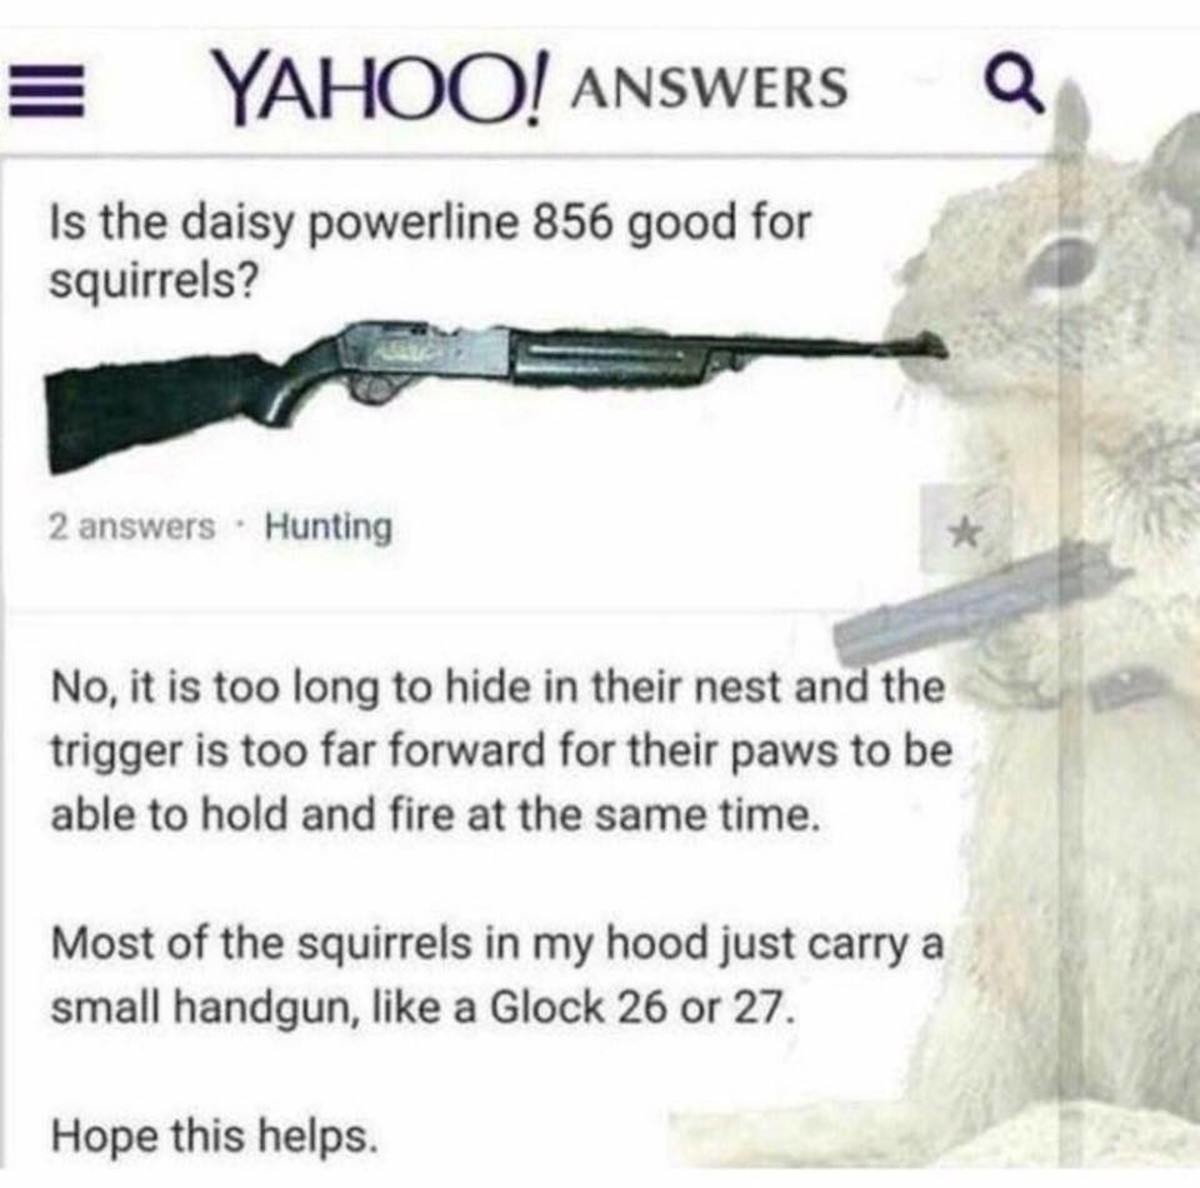 Have you guys seen some squirrels with glocks?. . is the daisy powerline 856 good for squirrels? manswers ' Hunting No, it is too long to hide in their nest an 